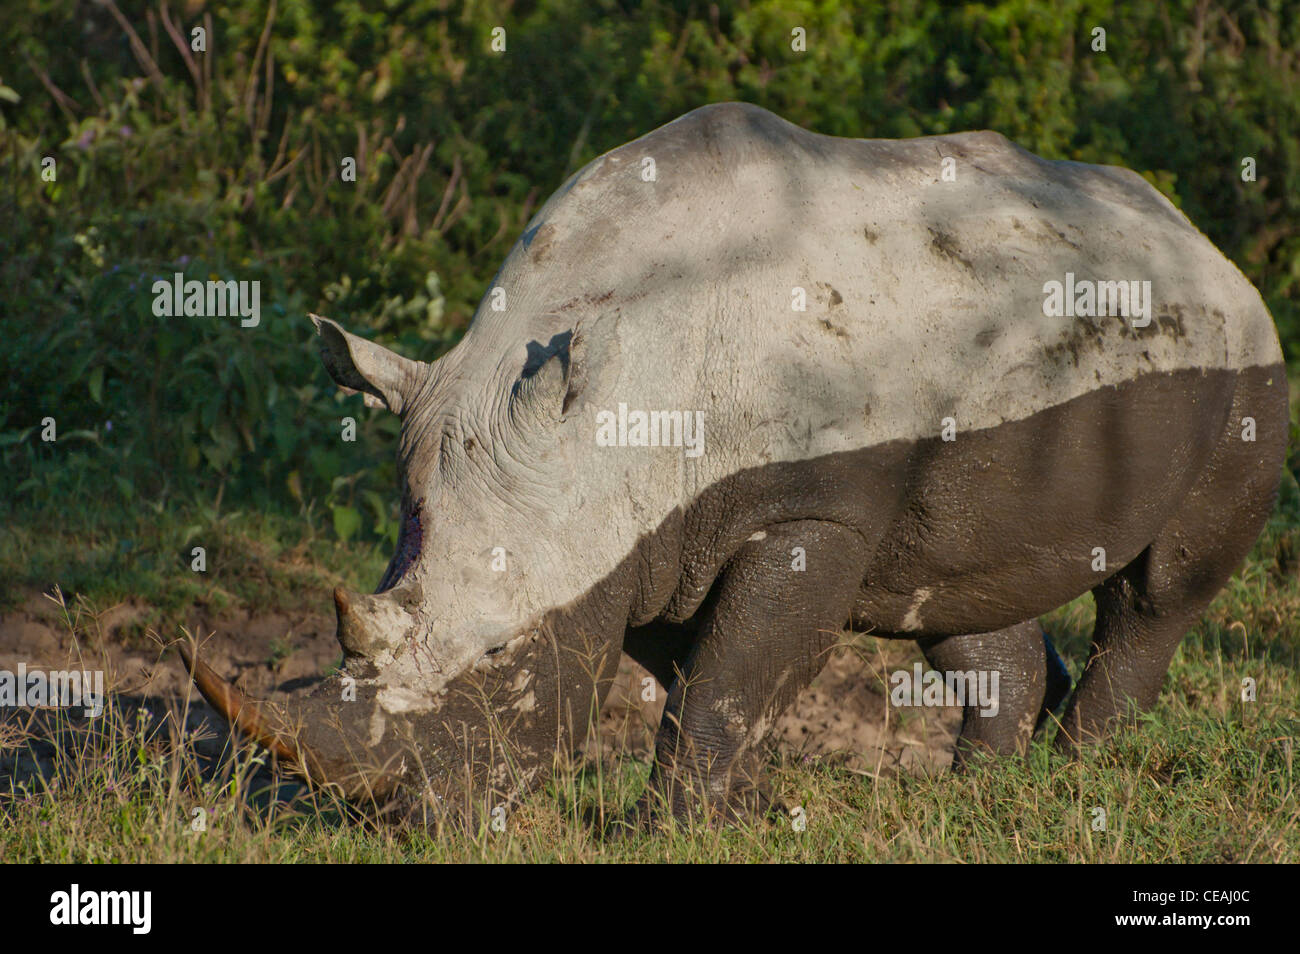 White Rhino grazing after mudbath having a black and white appearance Stock Photo